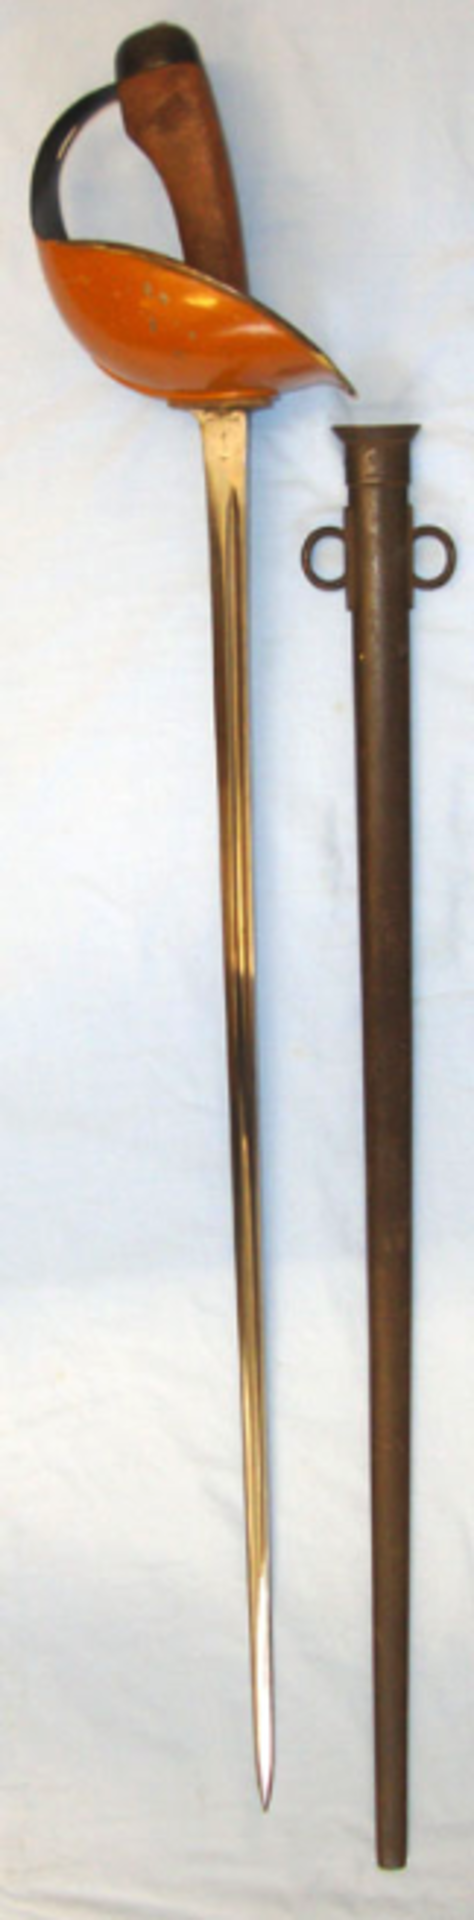 WW1 1915, 1908 Pattern British Heavy Cavalry Troopers Sword By Wilkinson Post WW1 Issue - Image 3 of 3